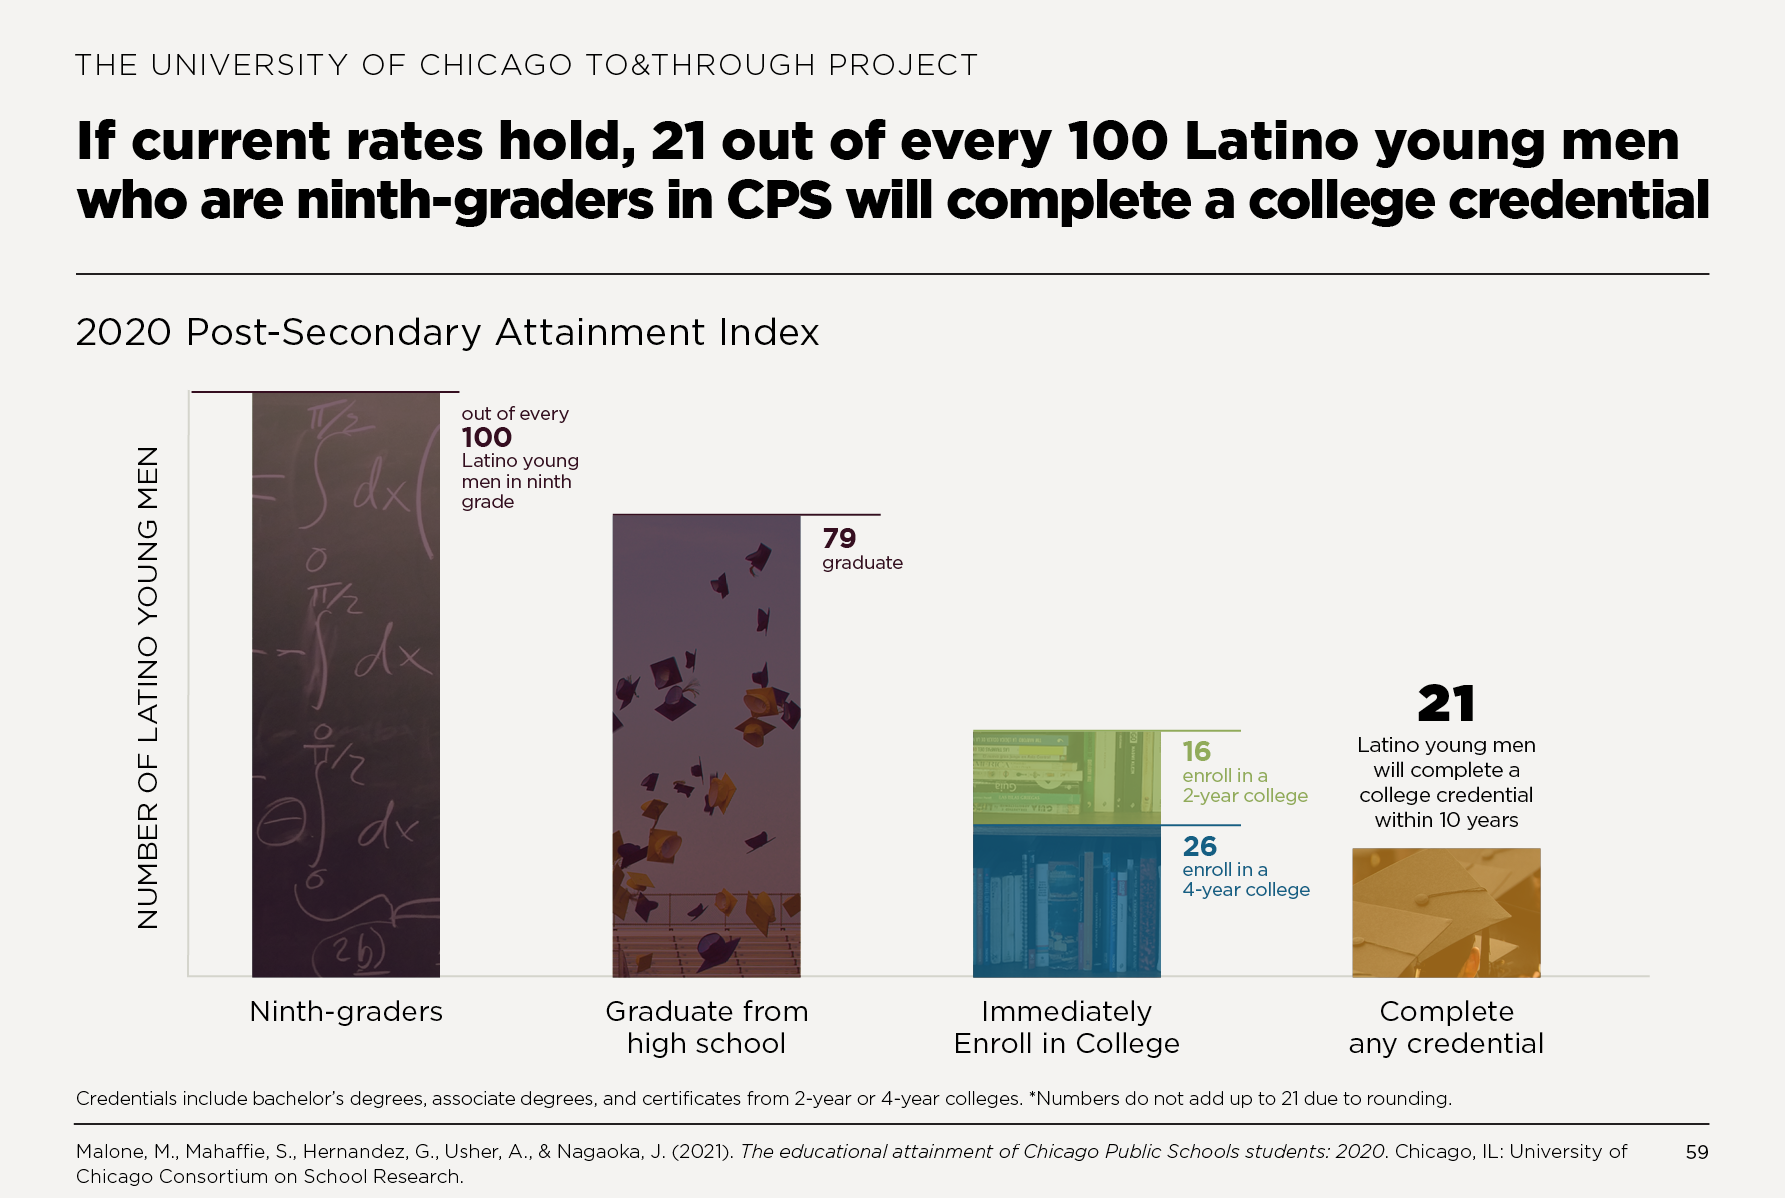 If current rates hold, 21 out of every 100 Latino young men who are ninth-graders in CPS will complete a college credential within 10 years